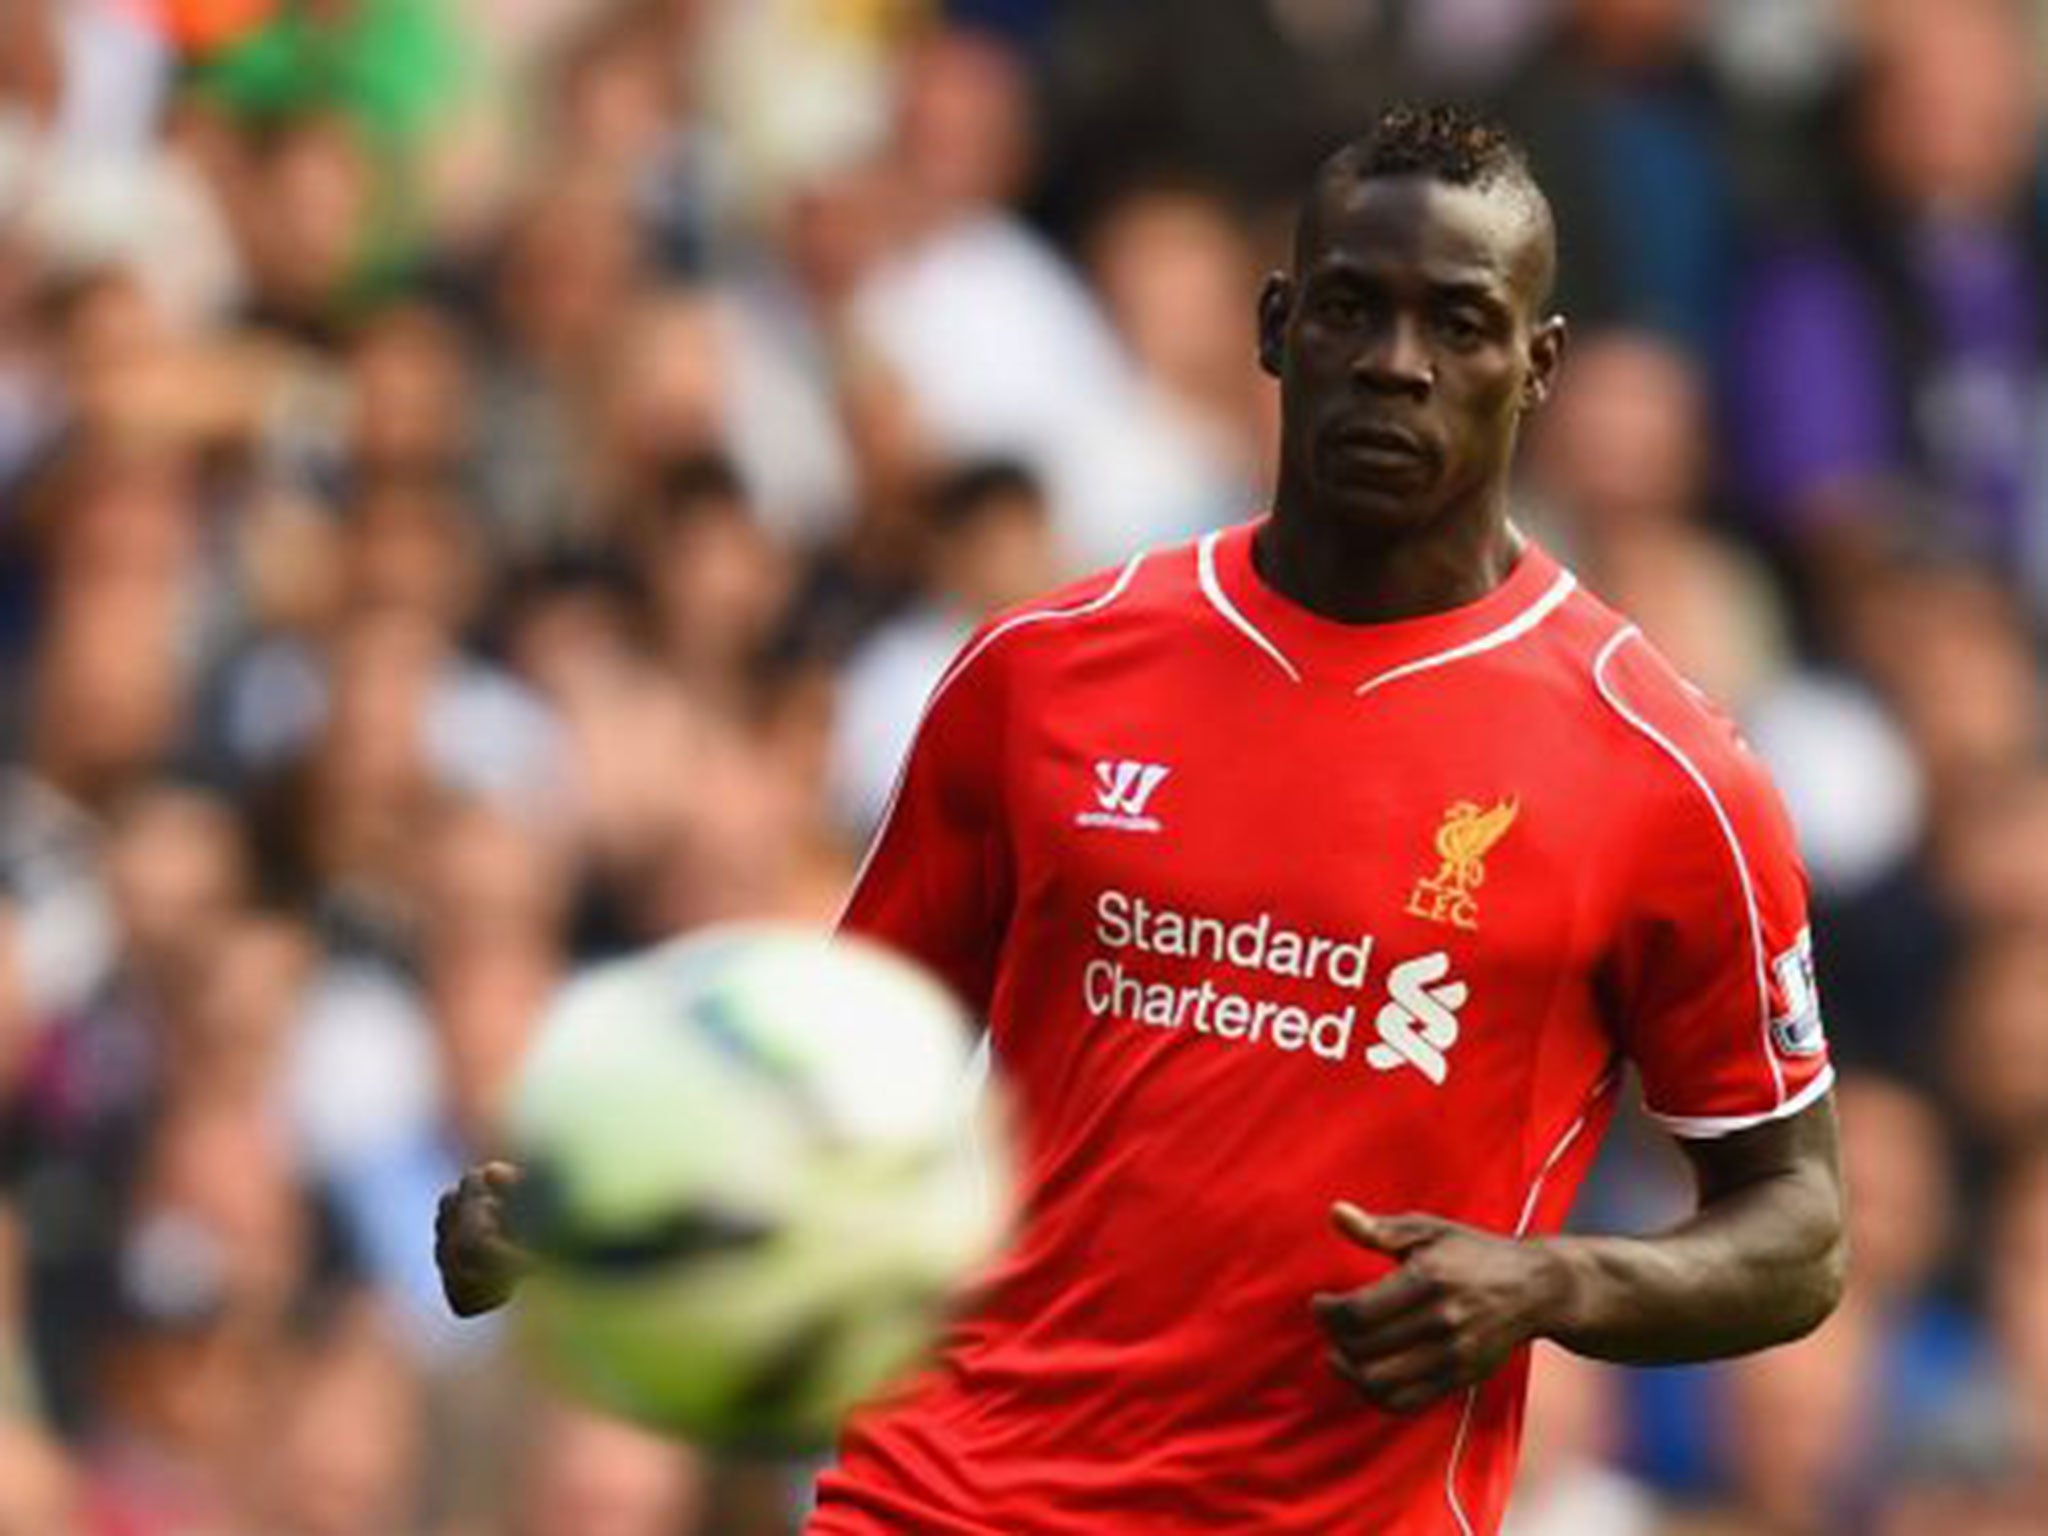 Mario Balotelli's Liverpool debut lasted 60 minutes